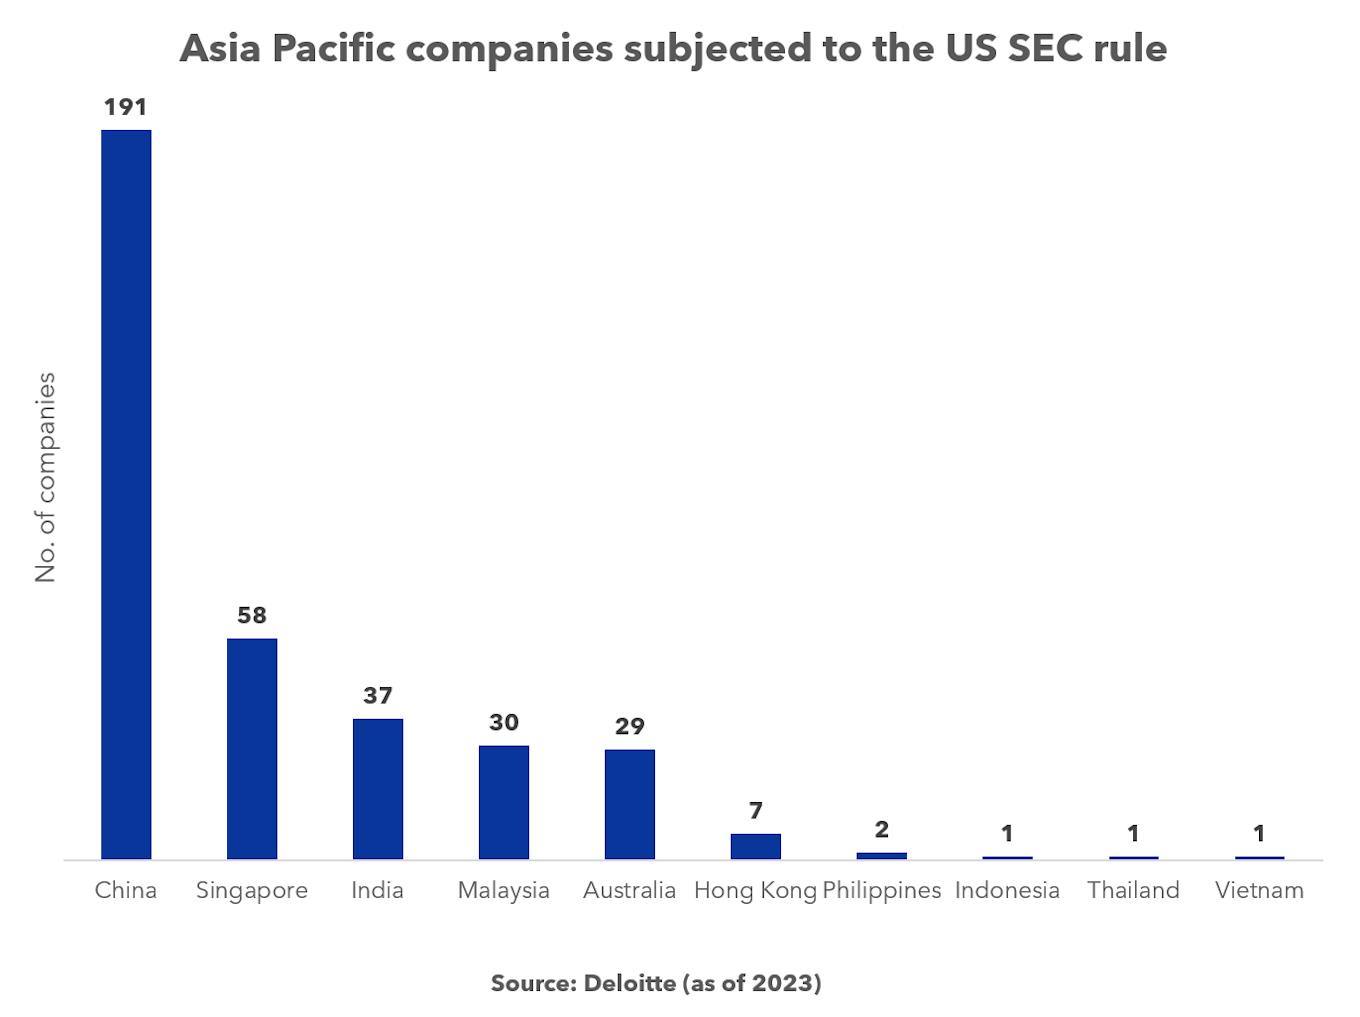 APAC companies affected by US SEC rule (based on 2023 Deloitte data)